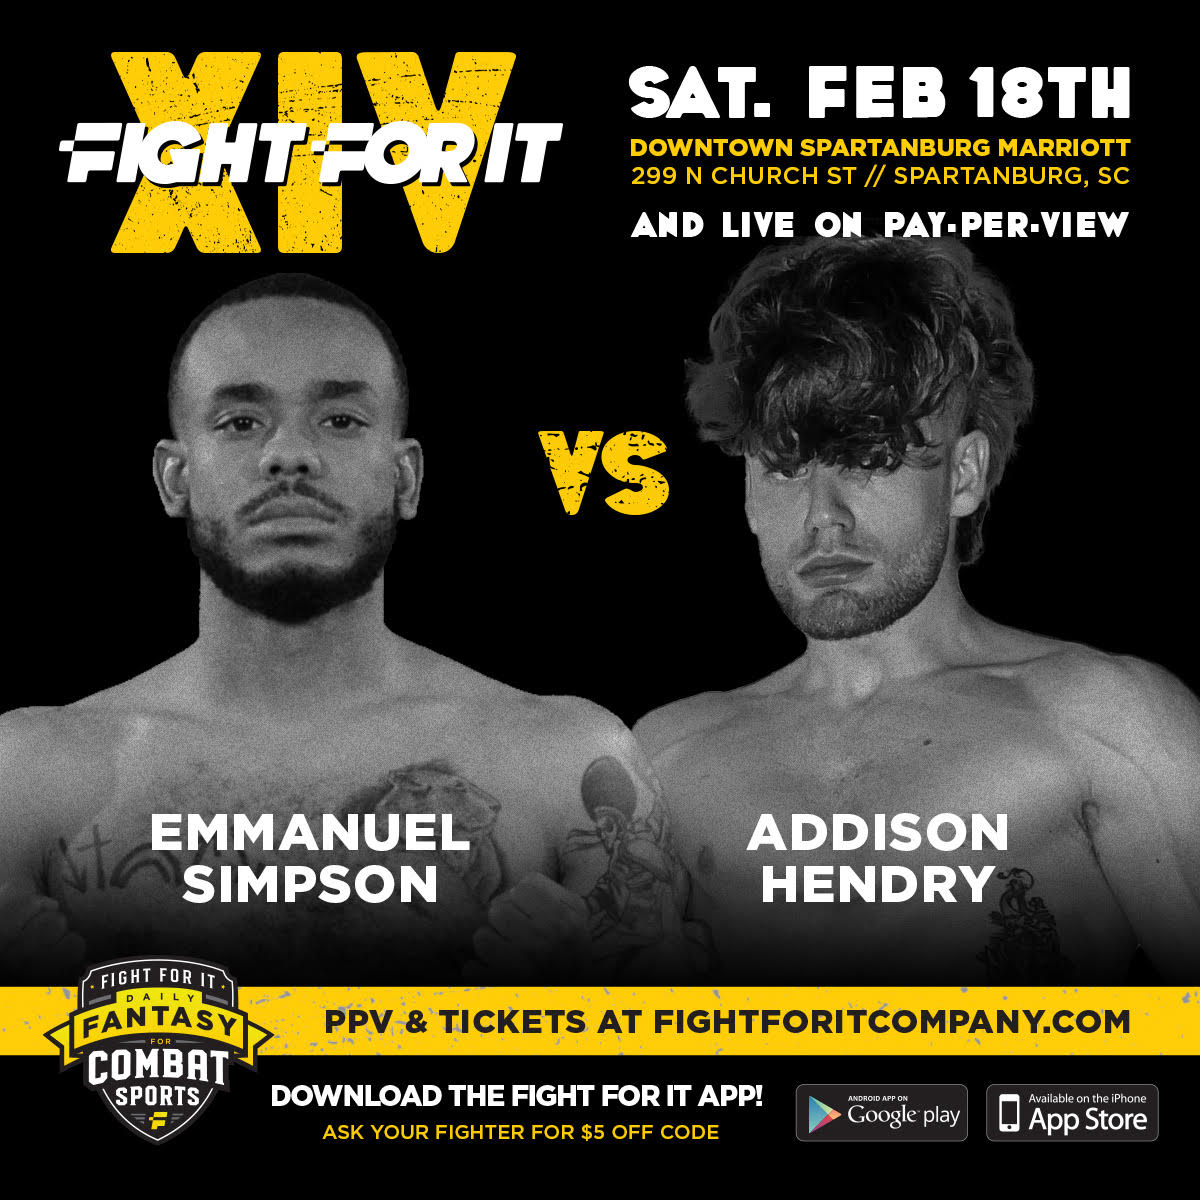 Emmanuel Simpson welcomes Addison Hendry to the Fight For It cage on Feb